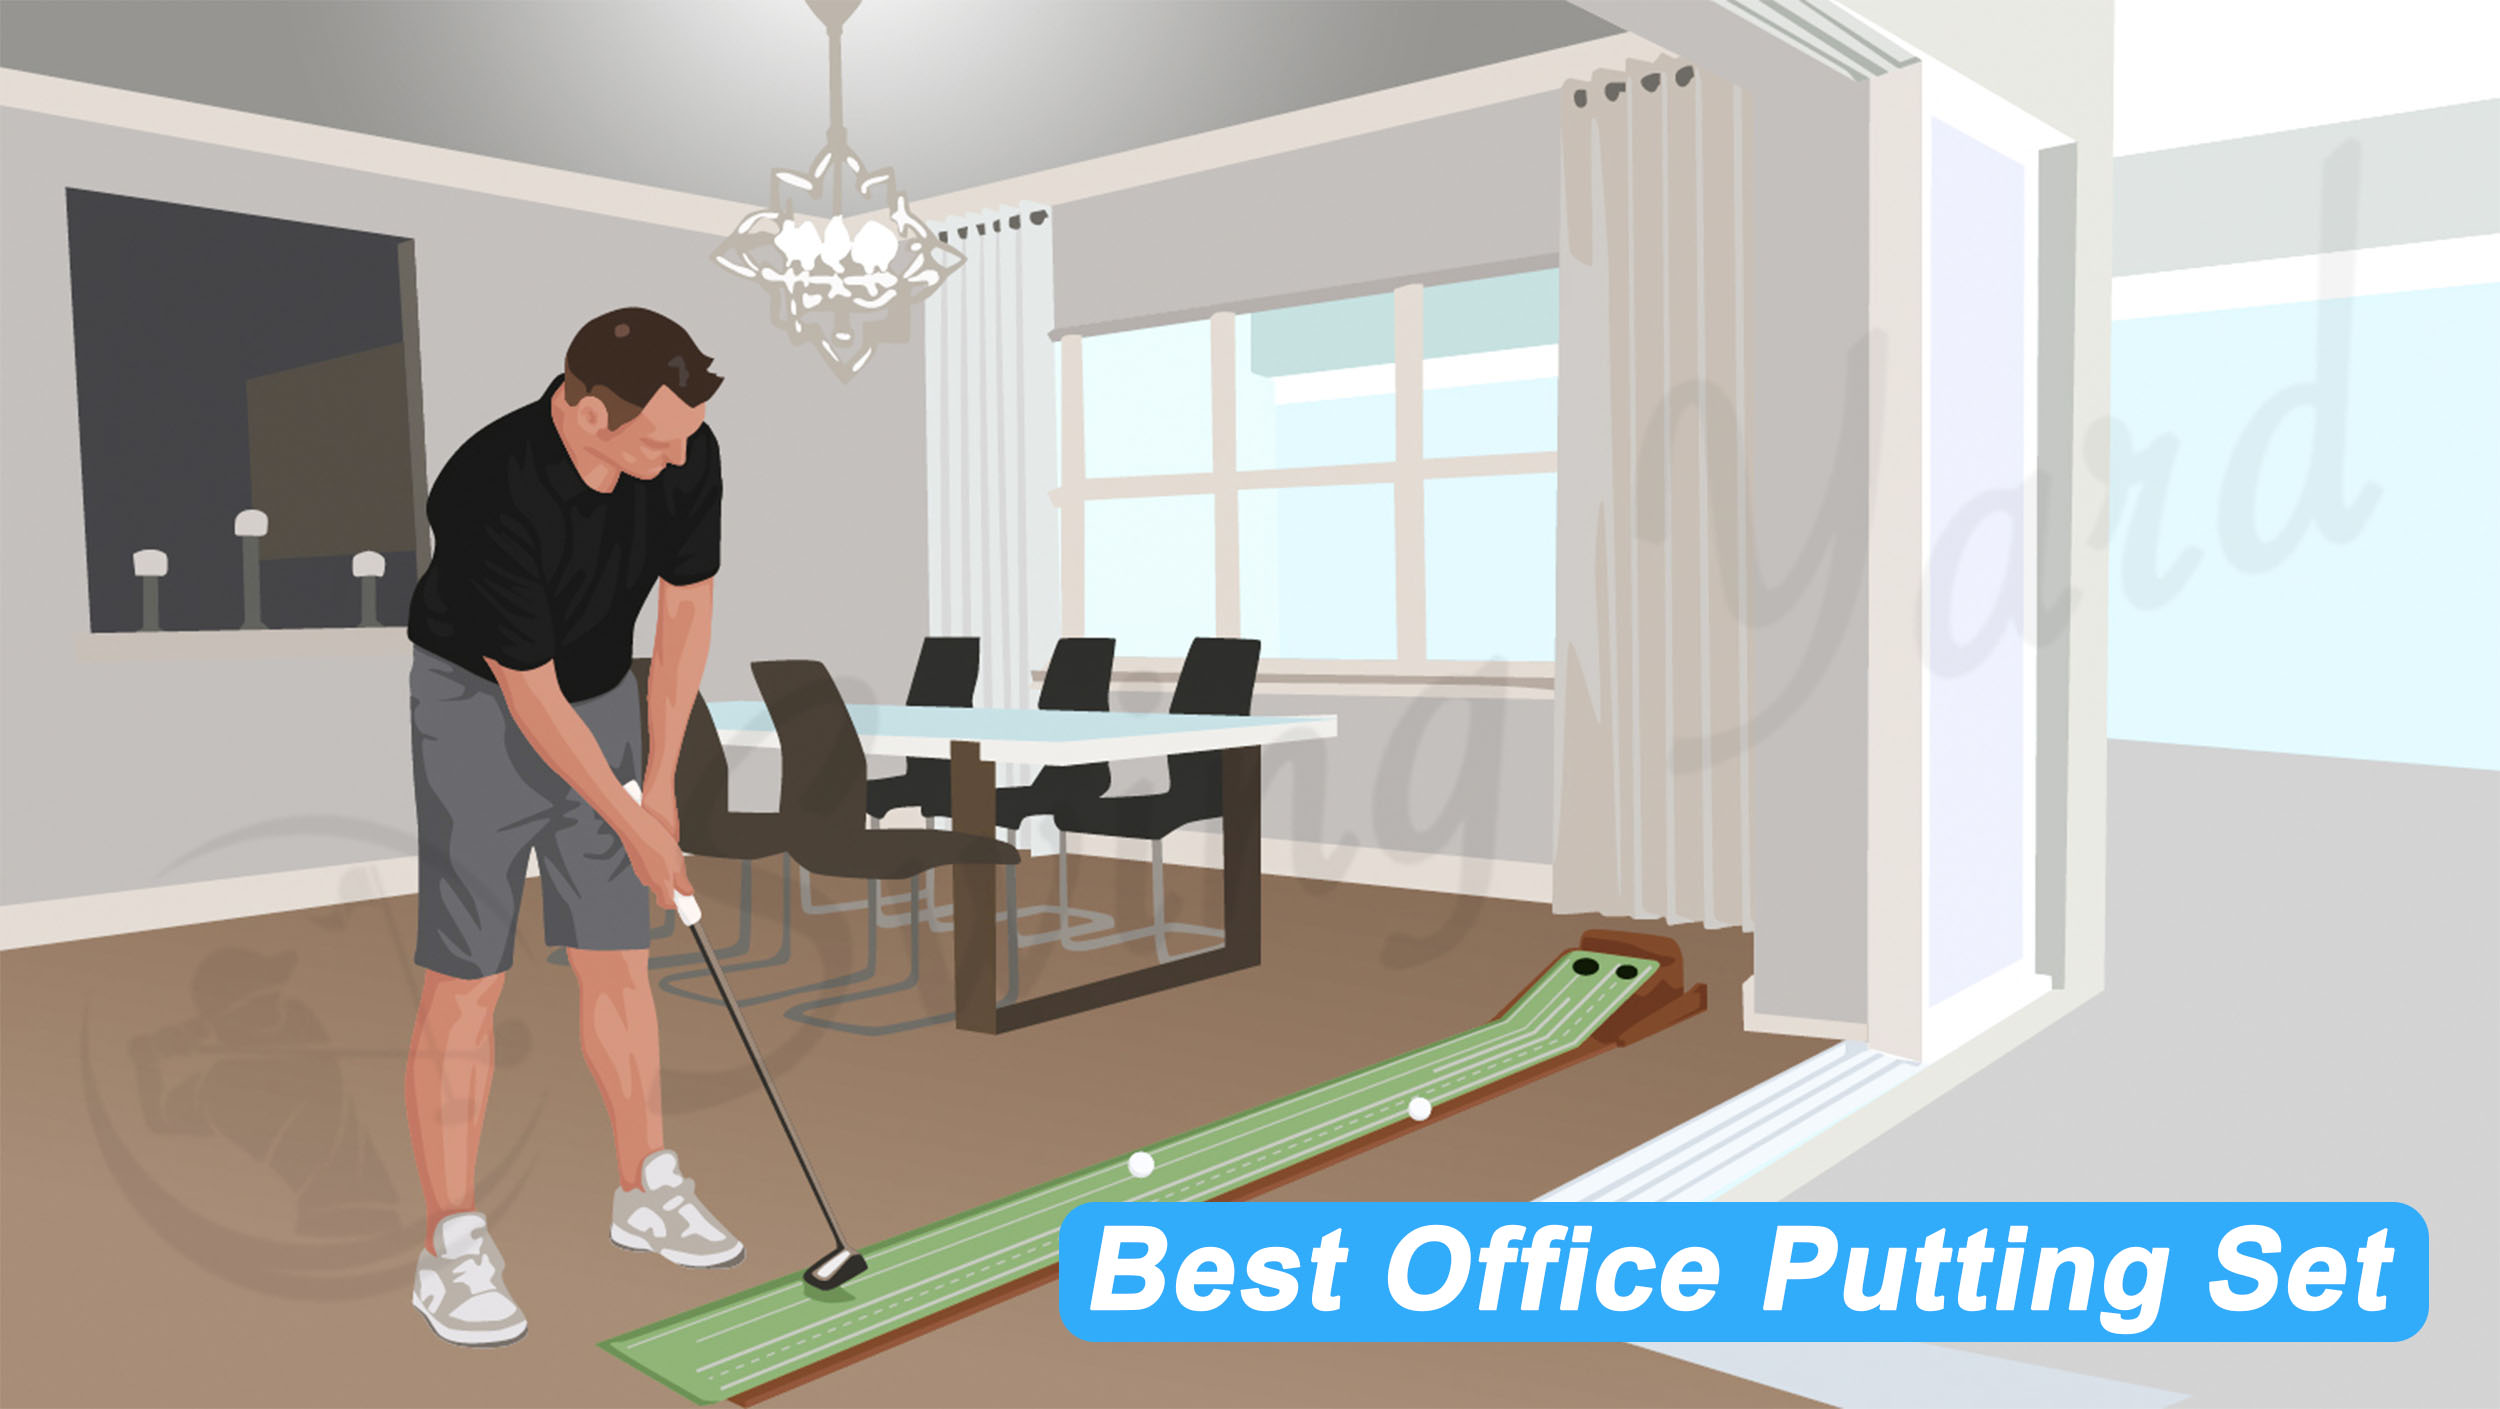 A guy using an office putting set